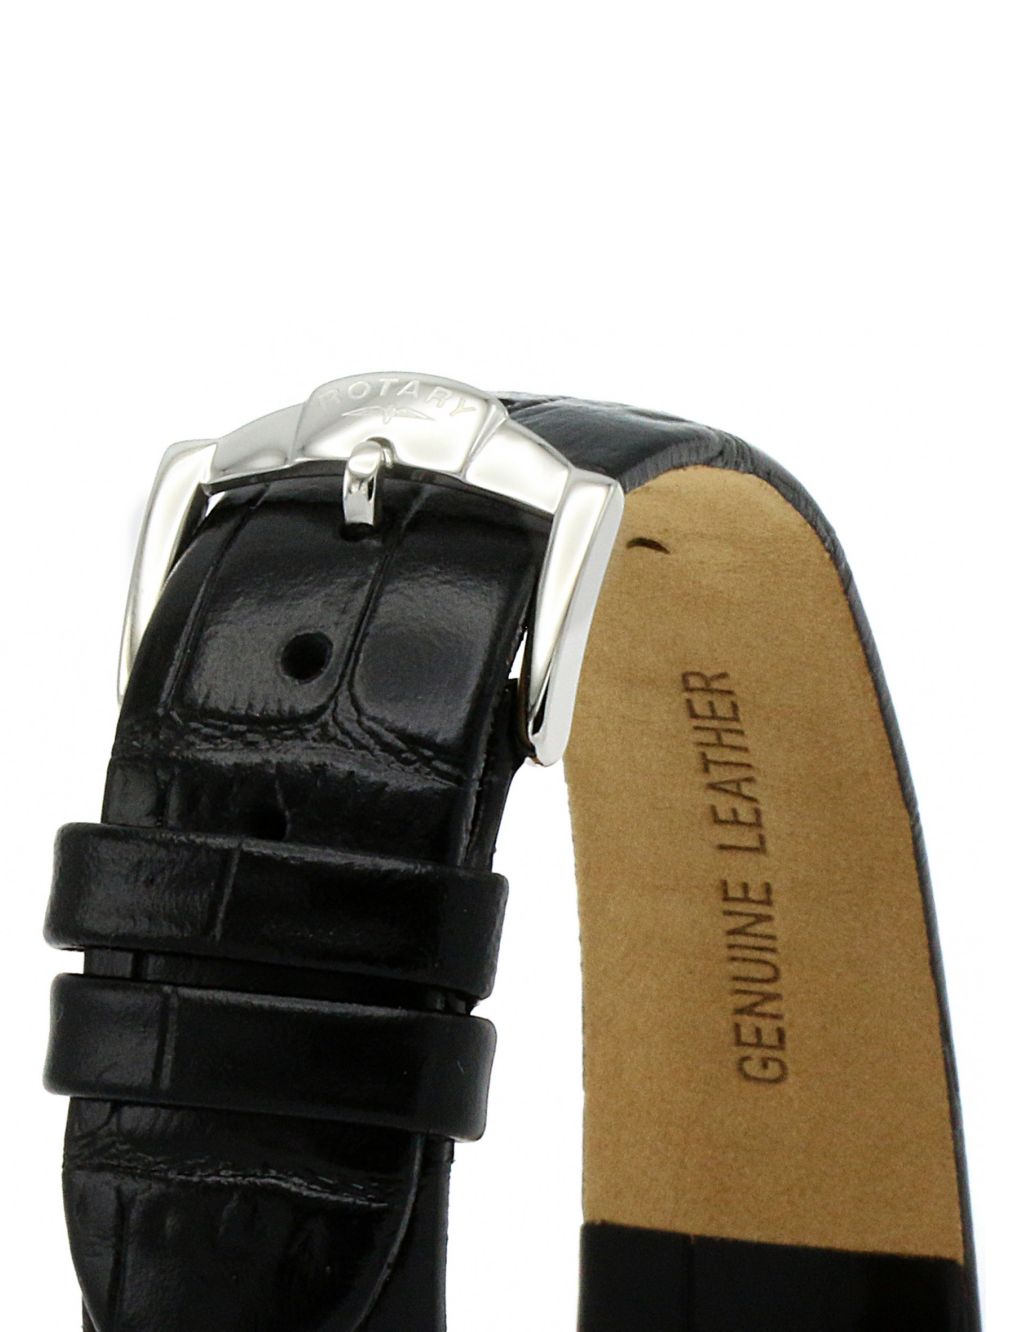 Rotary Casual Black Leather Watch image 4